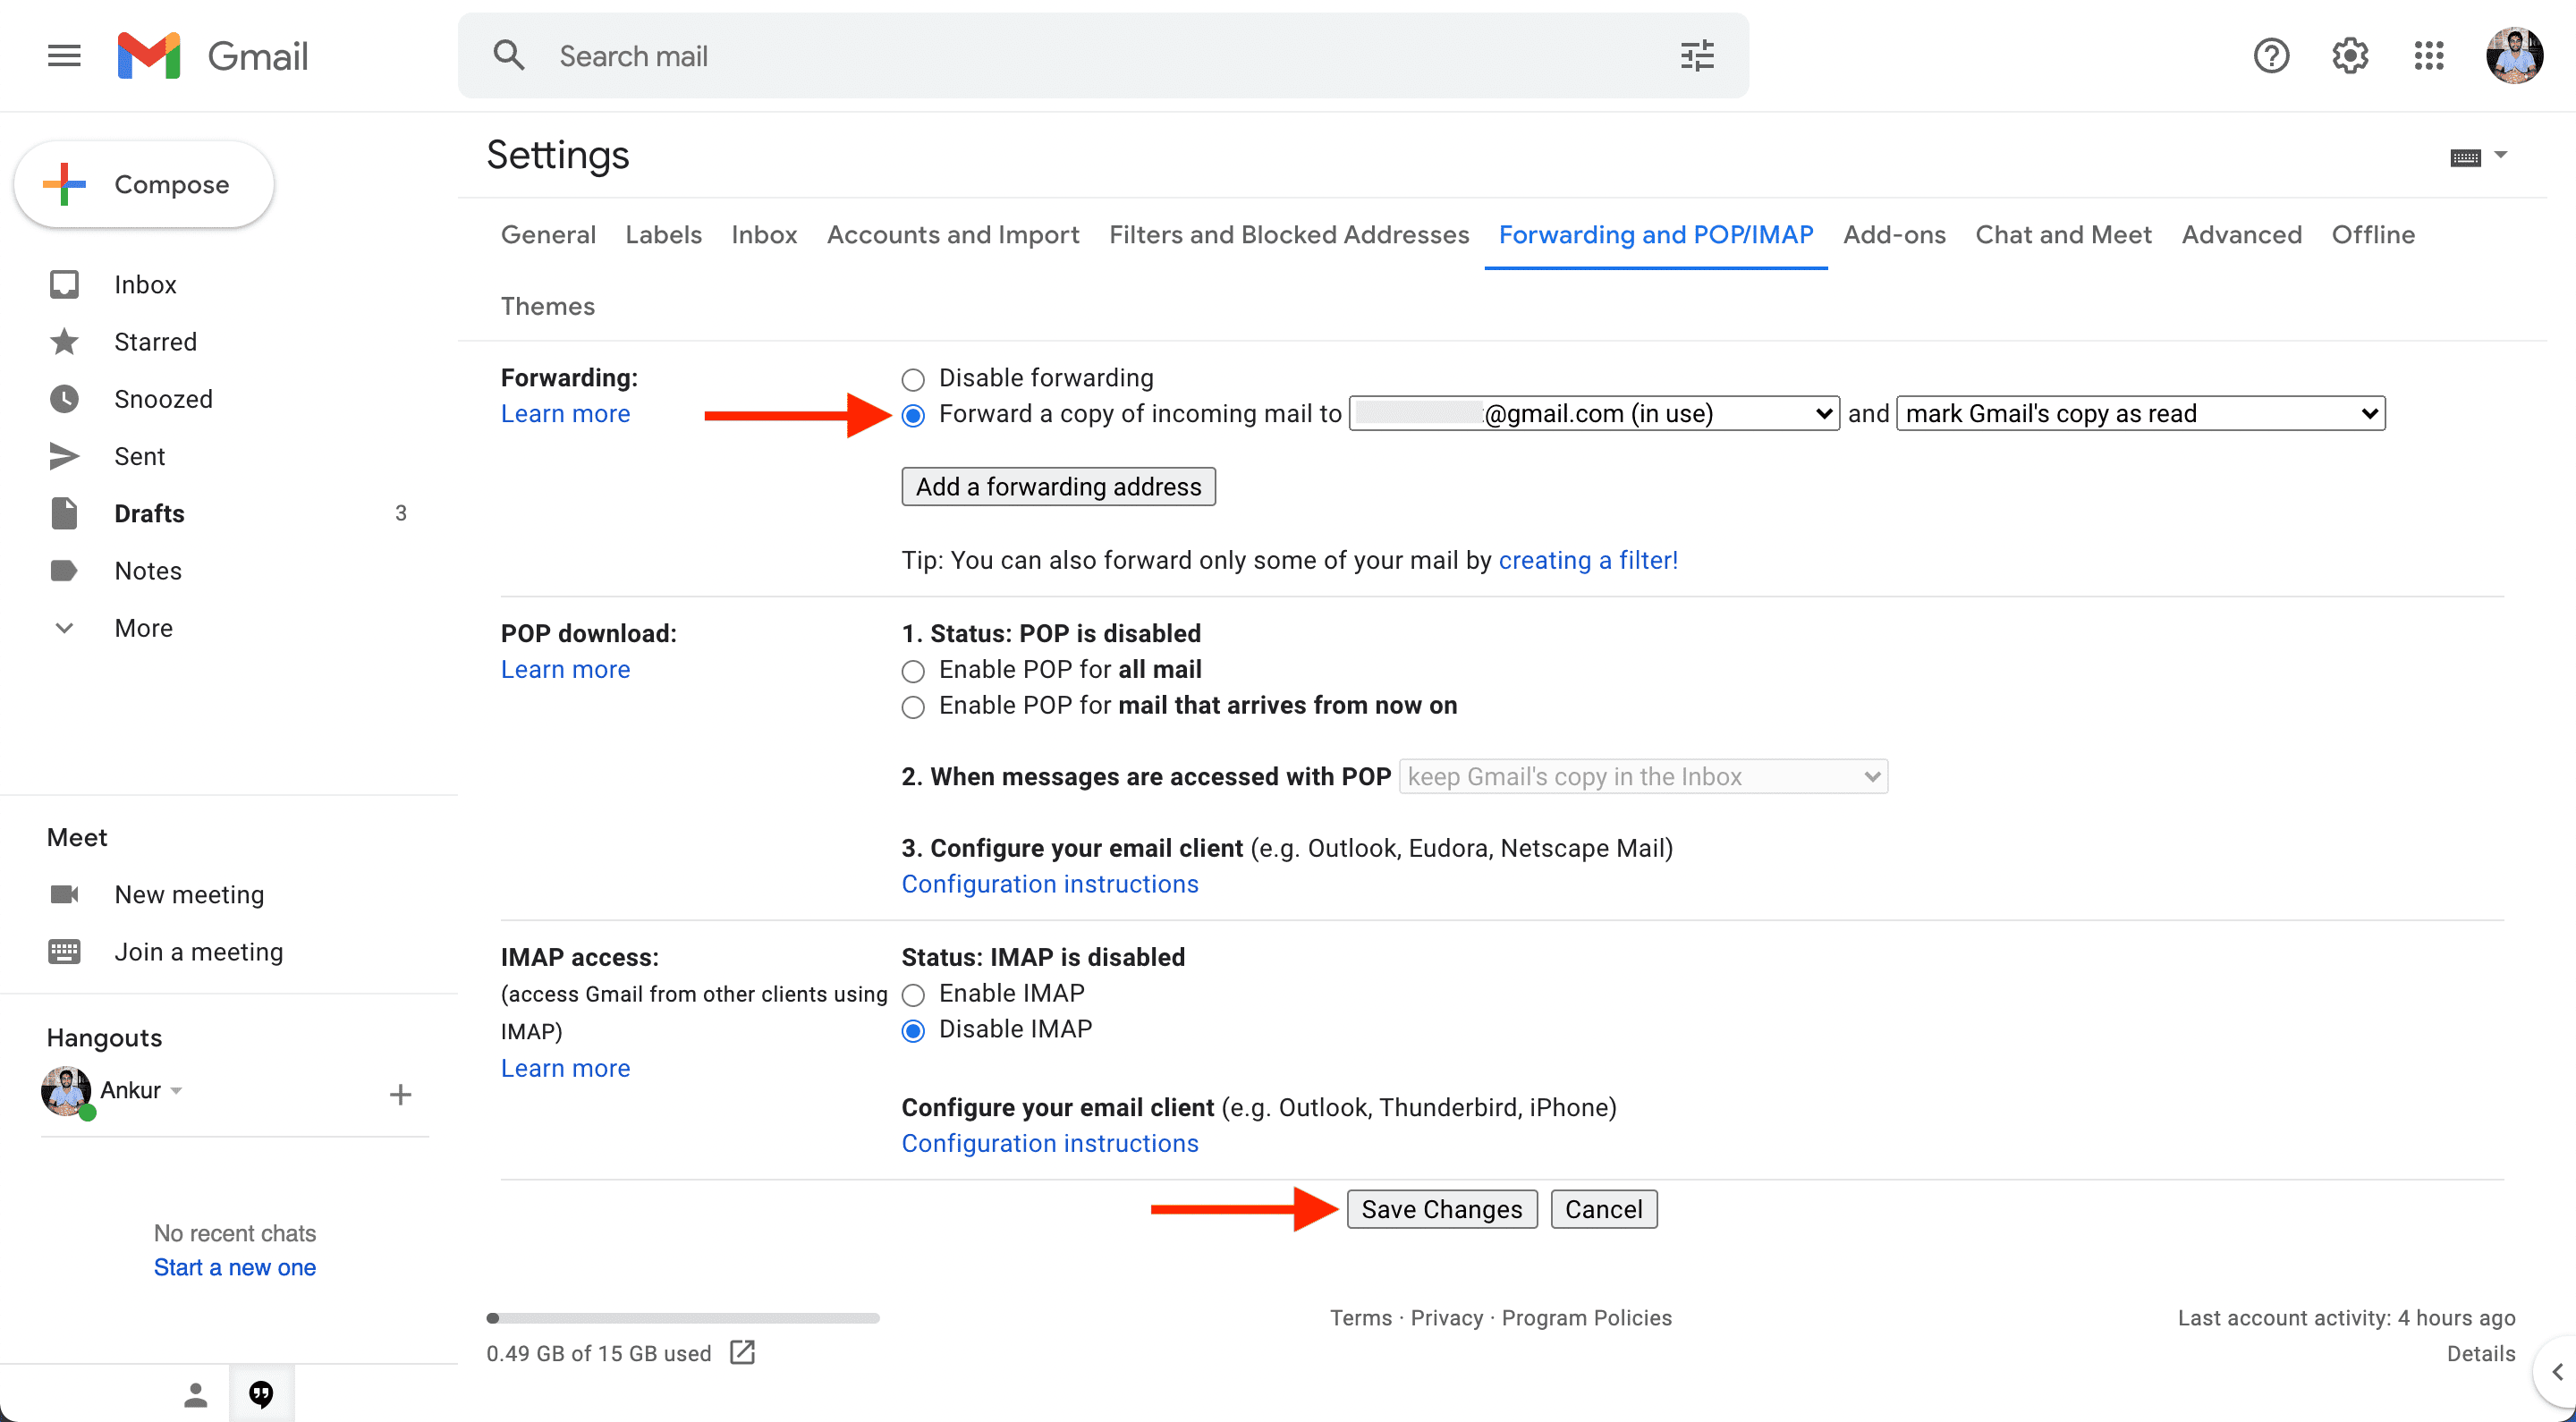 Forward a copy of incoming mail to other Gmail account